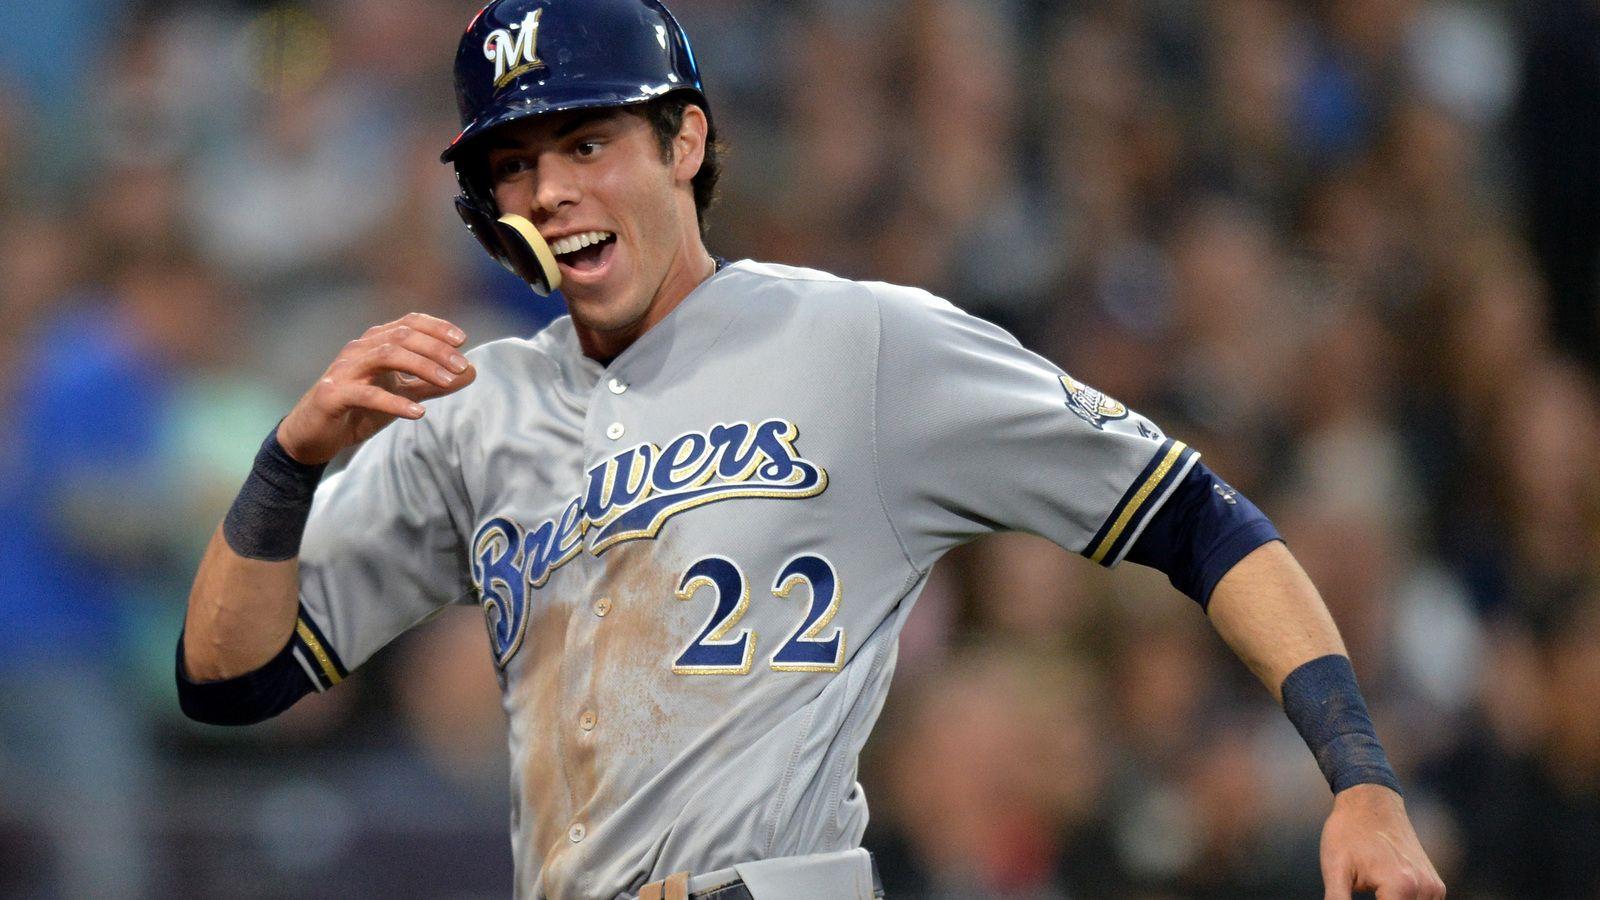 Christian Yelich to miss game with oblique stiffness.